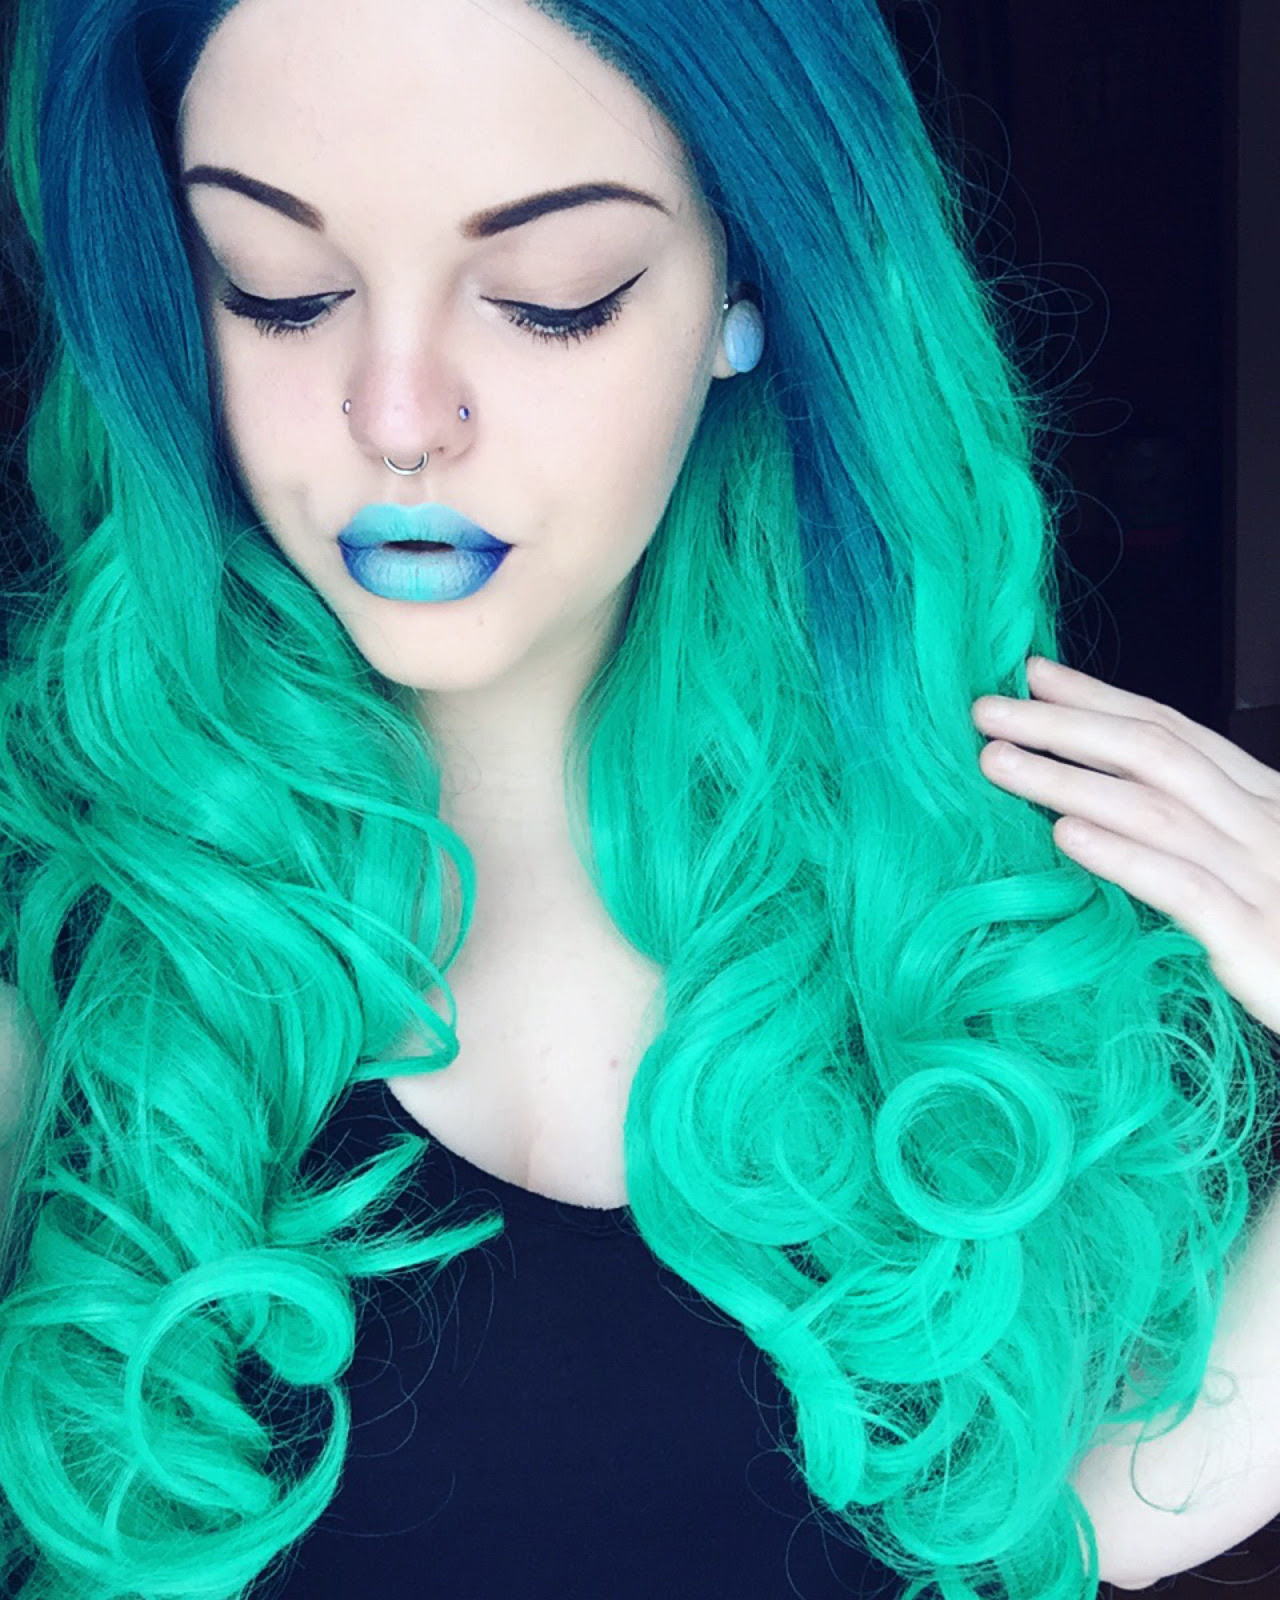 Becoming A Mermaid: Fashion, Style, & Beauty Tips